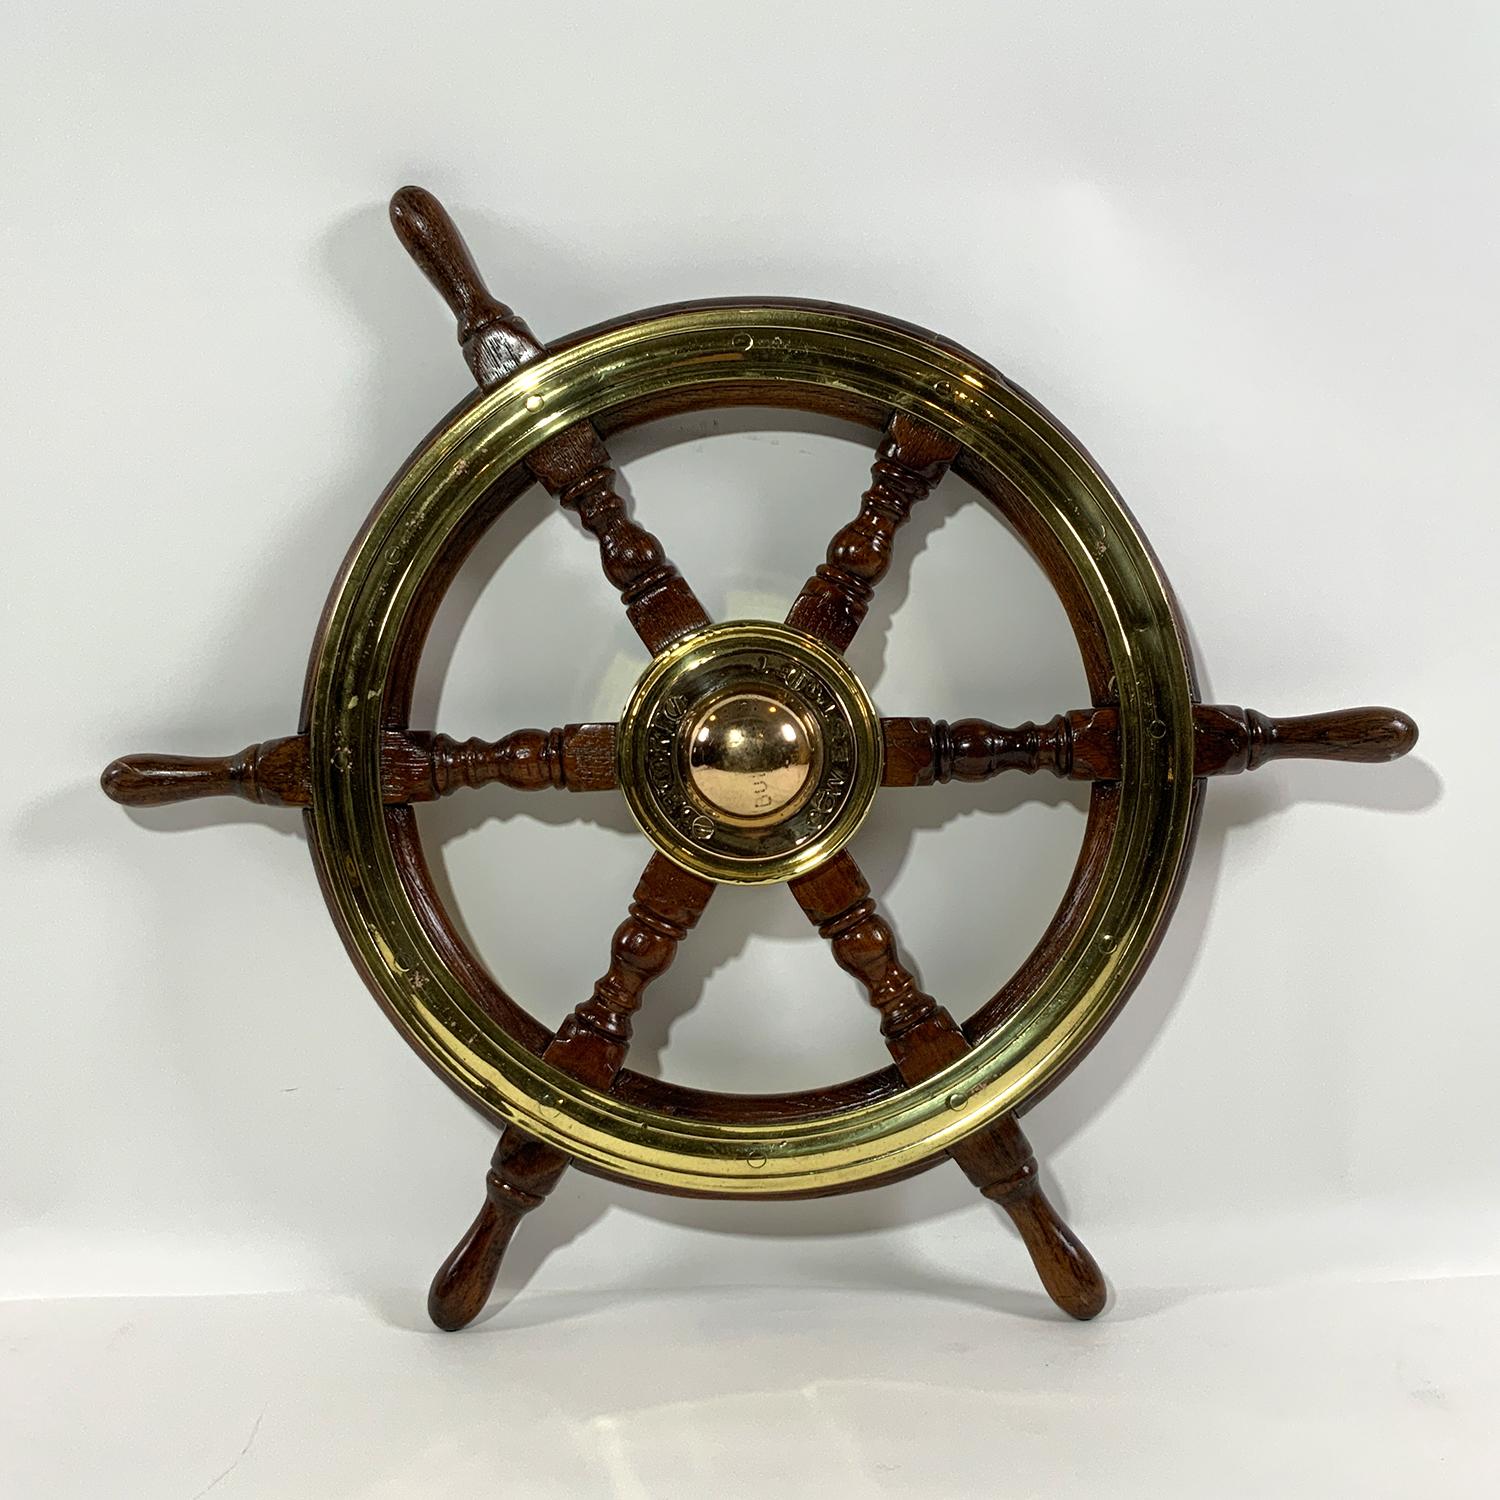 Early twentieth century six spoke ships wheel with turned spindles. Heavy brass hub is engraved 